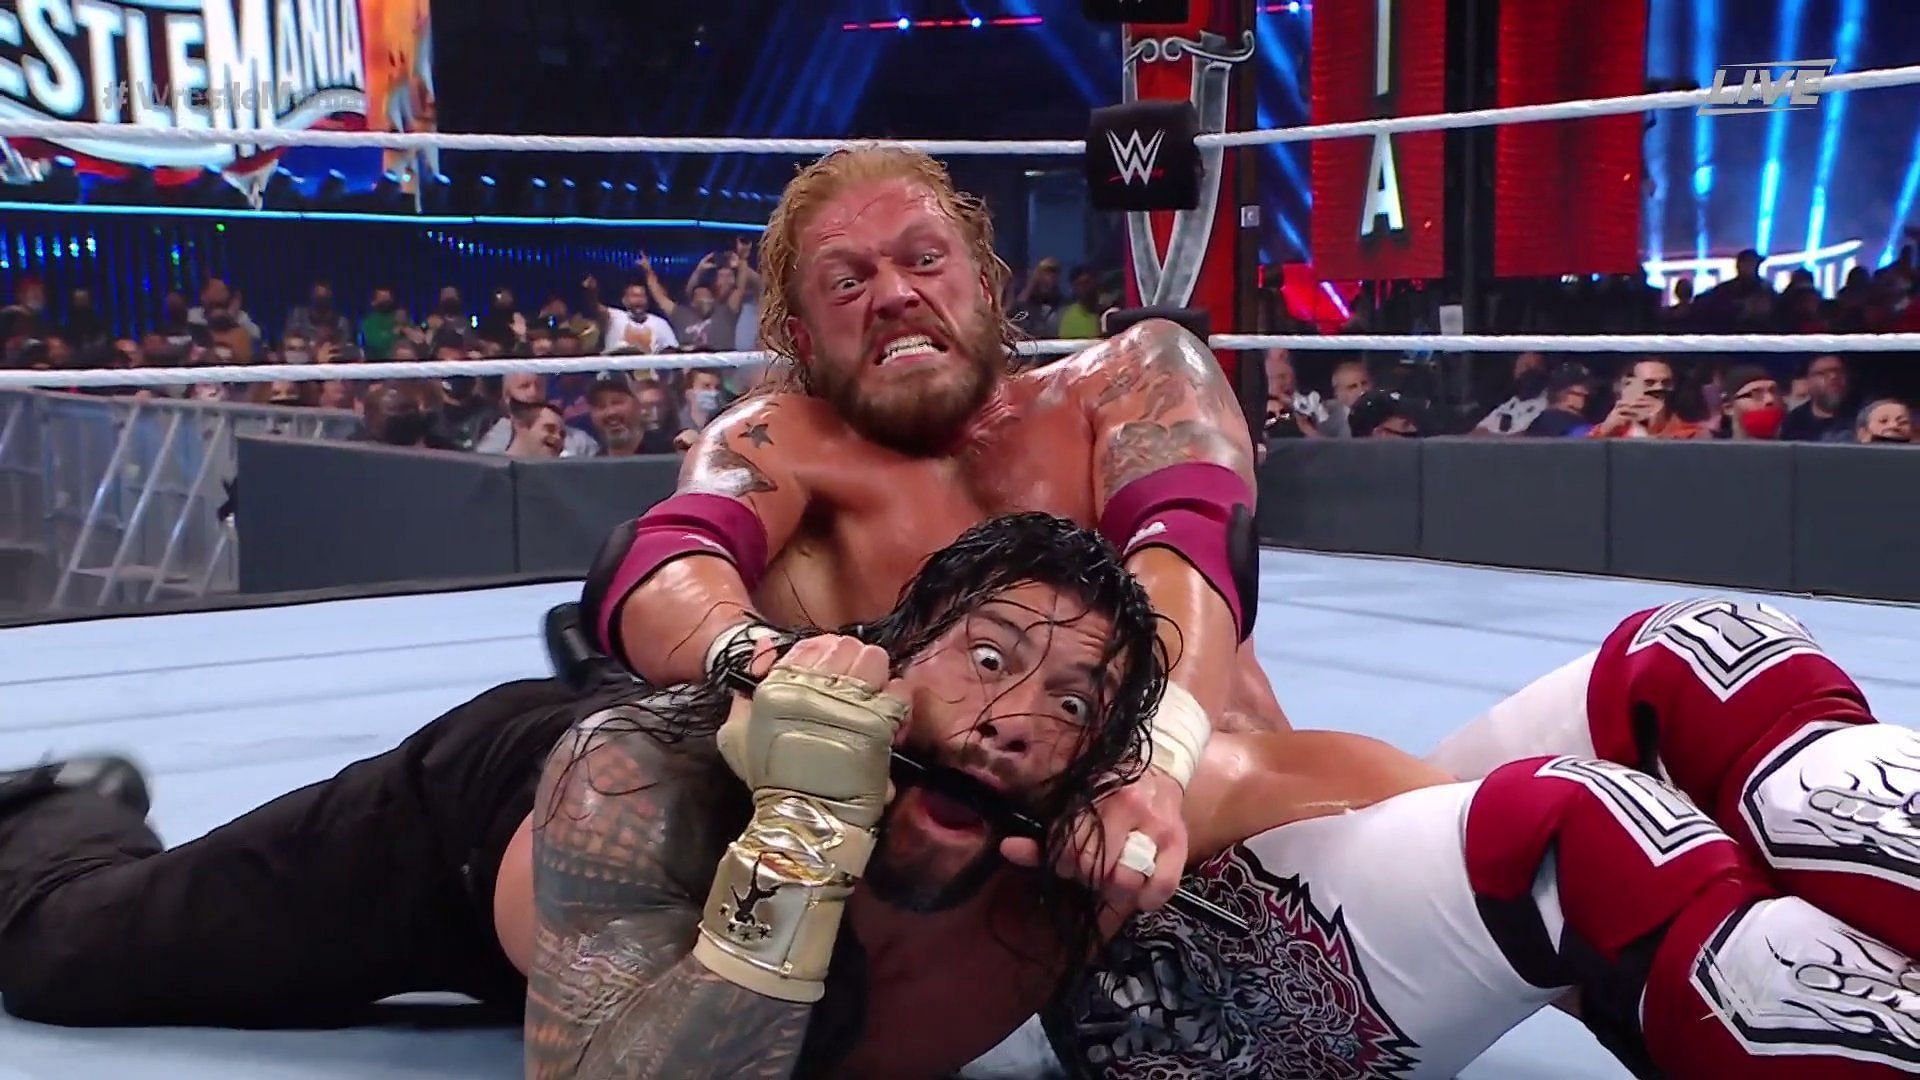 Edge collided with Daniel Bryan and Roman Reigns at WrestleMania 36.